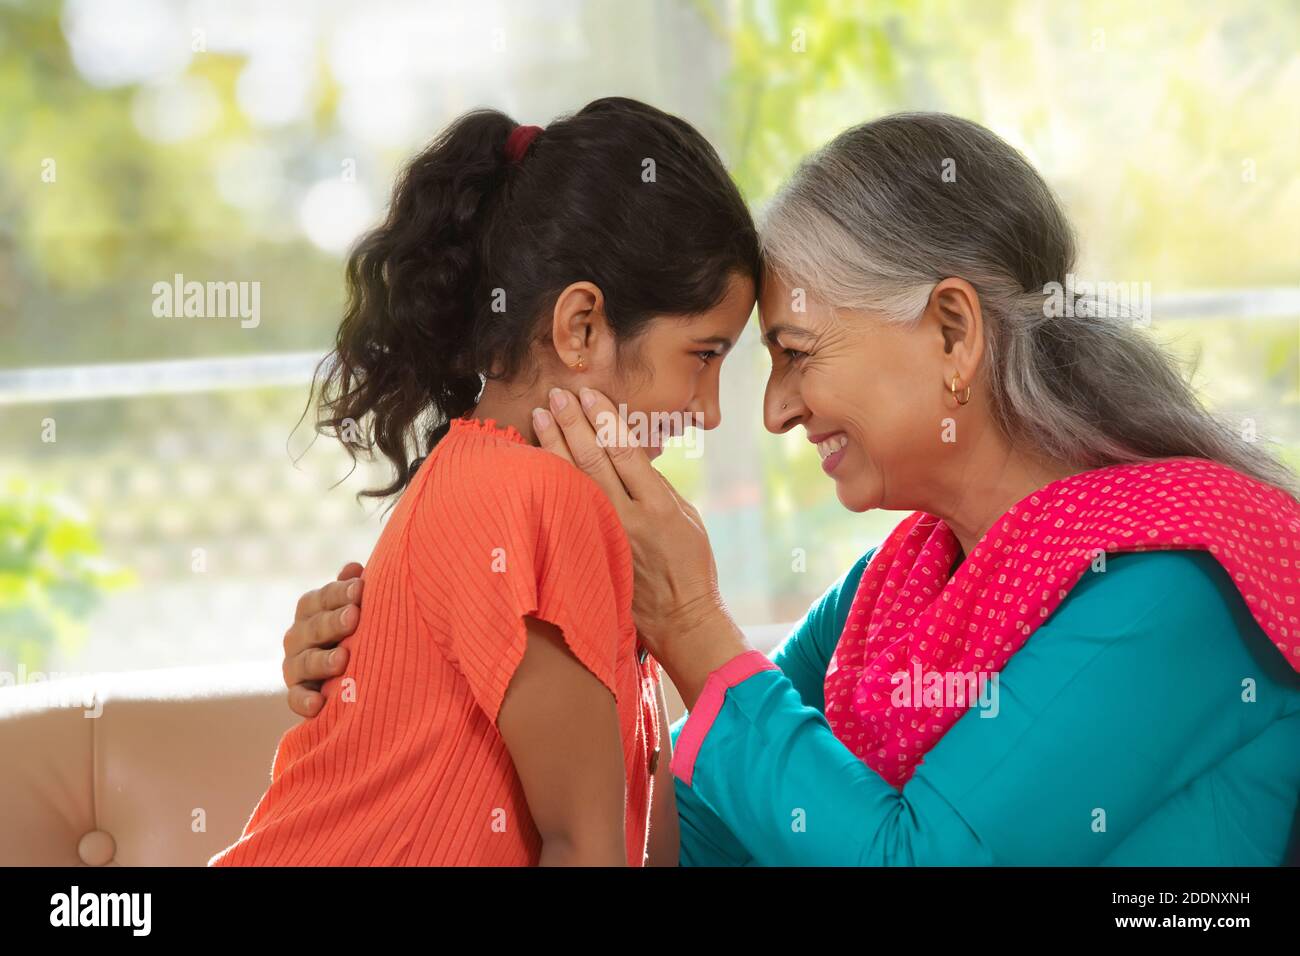 Grand daughter and grand mother touching foreheads showing affection in a living room Stock Photo